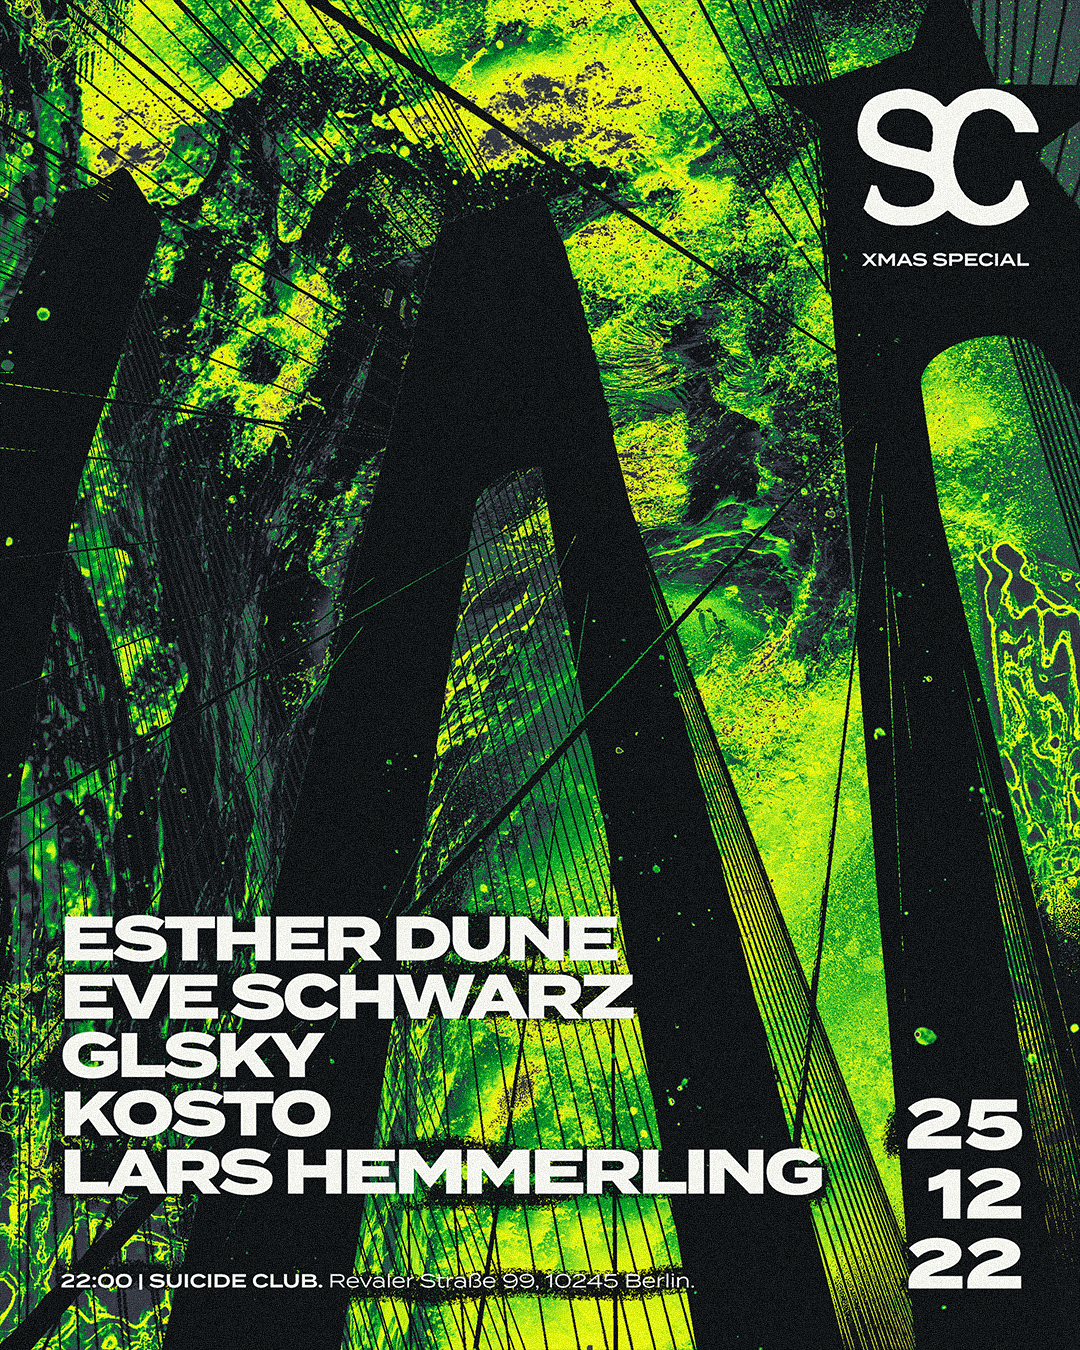 SCB || CLUB NIGHT - CHRISTMAS SPECIAL w/ Esther Dune, Lars Hemmerling, Eve Schwarz - フライヤー裏